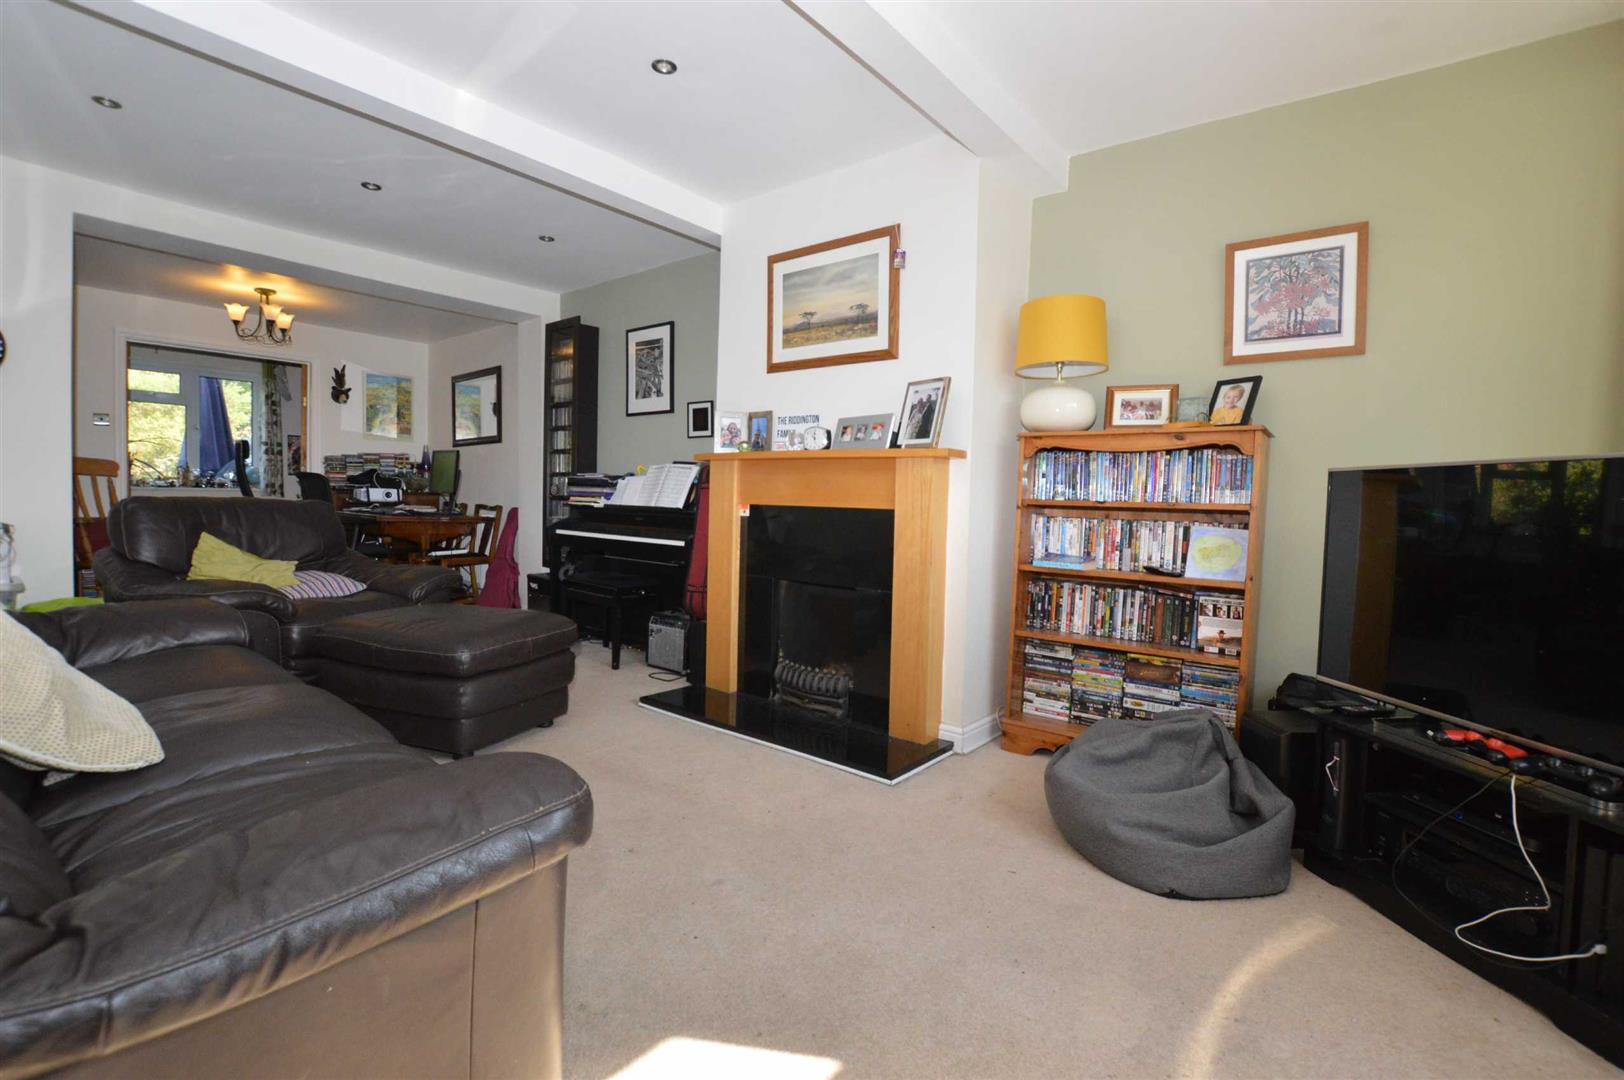 Norman Road Caversham house for sale in Reading